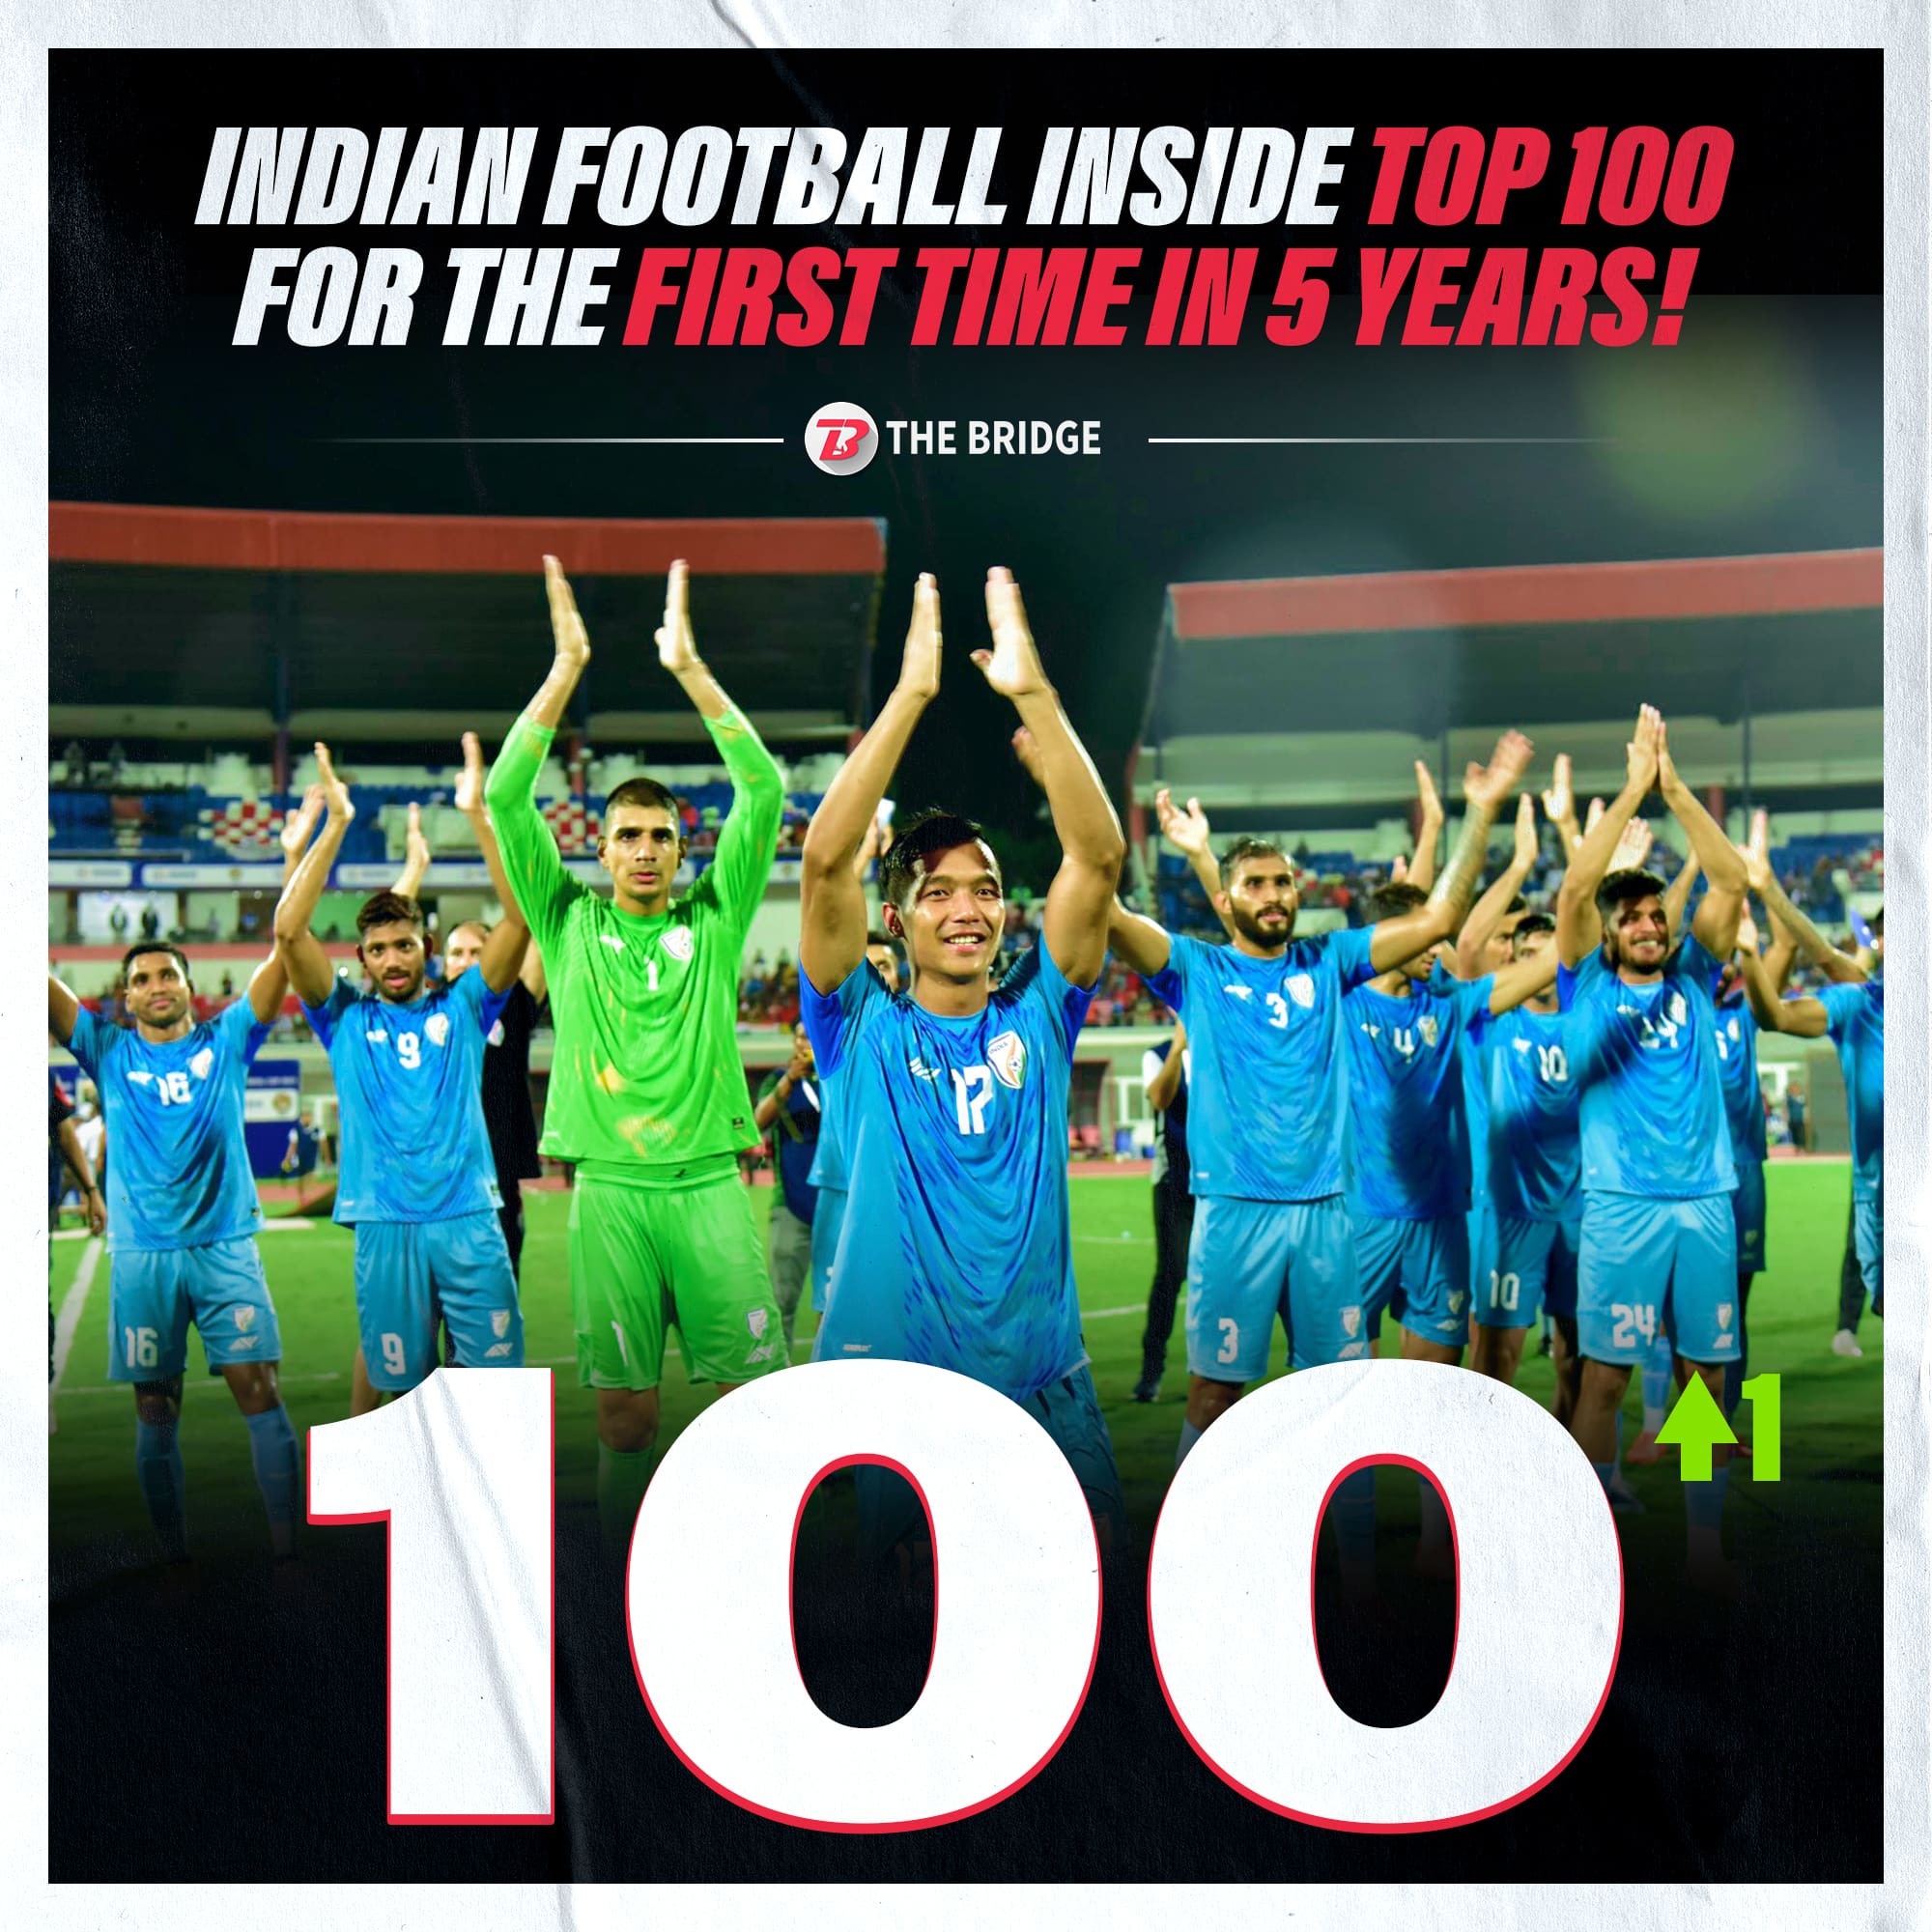 Indian Football Team Soars to Top 100 in FIFA Rankings after Five Years